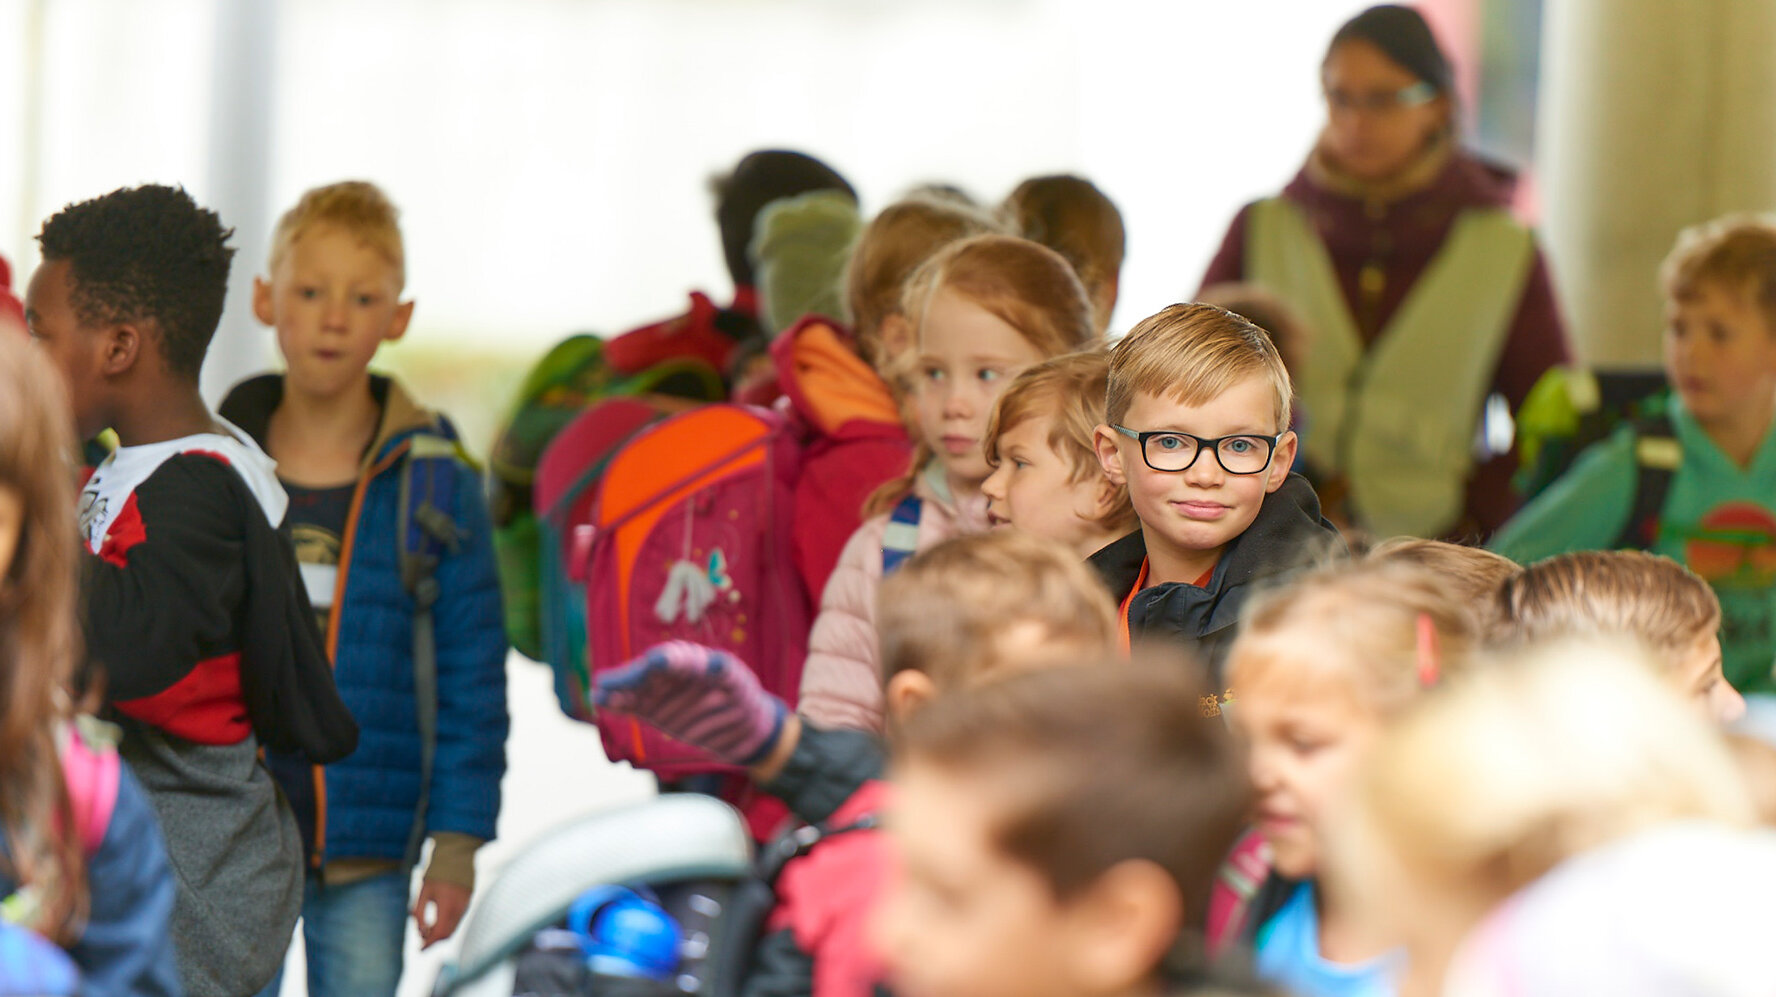 In a group of students, a boy with glasses looks directly into the camera.